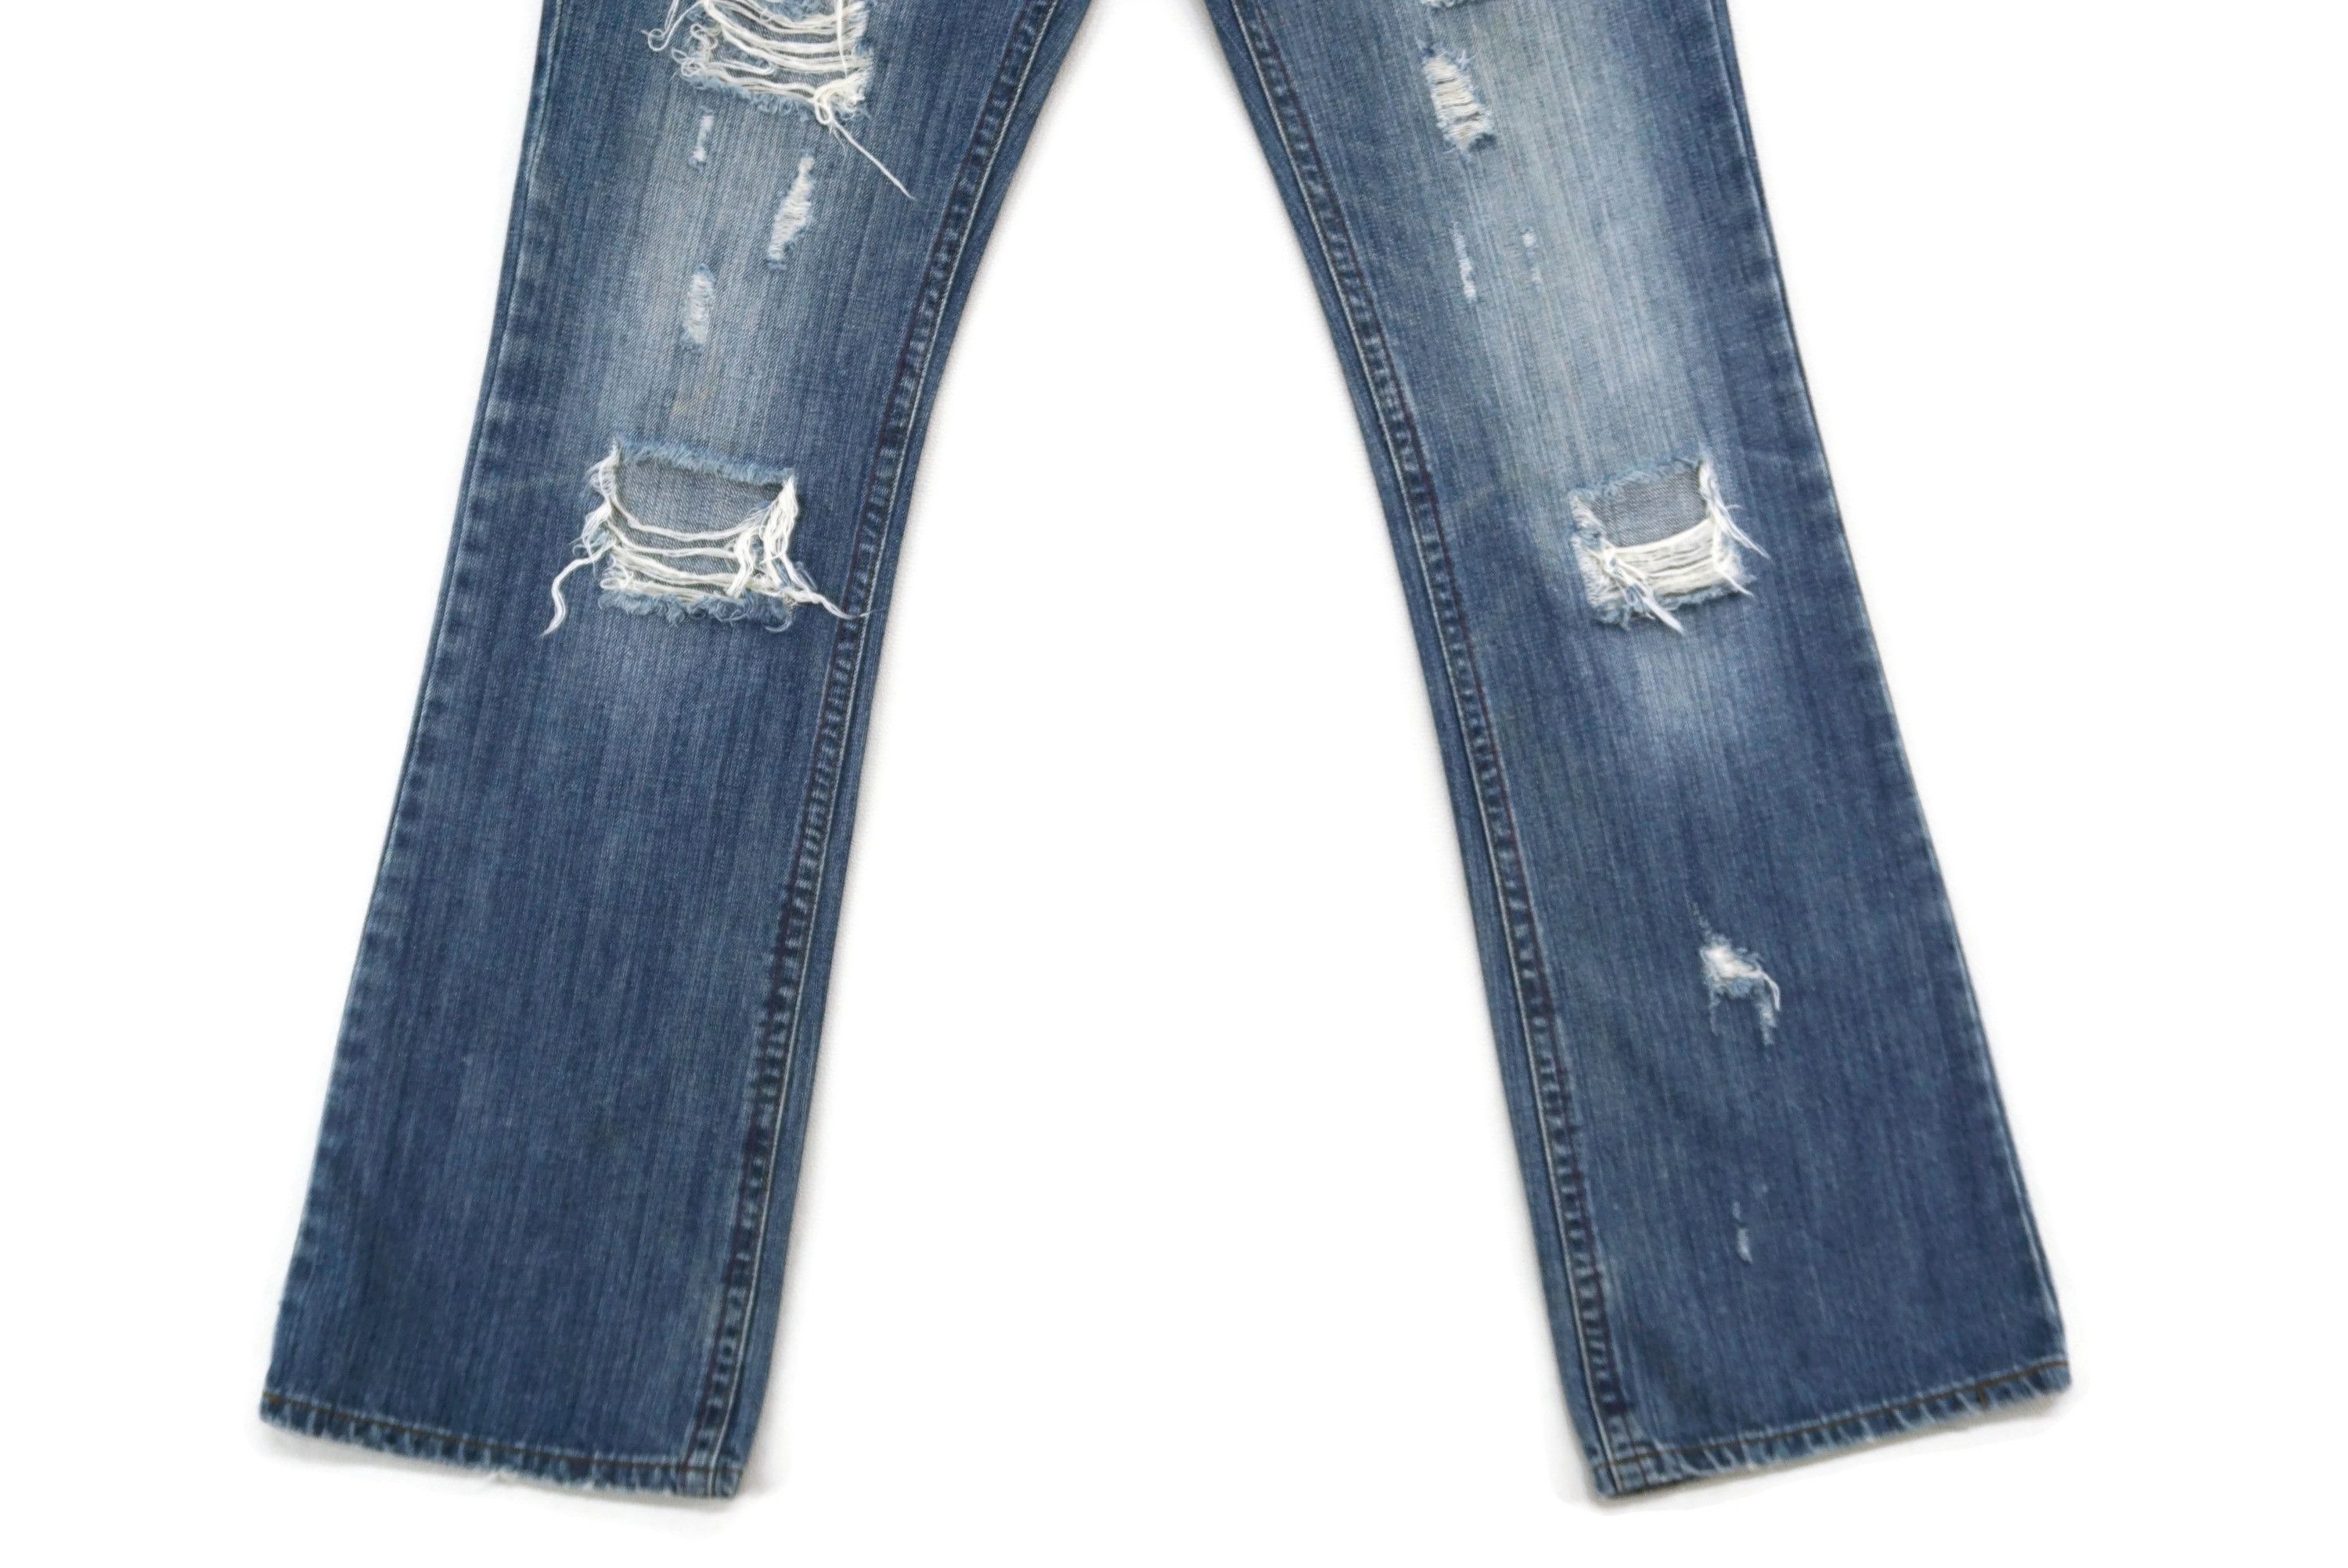 Distressed Denim Midas Jeans Bootcut Jeans Flare Jeans Japanese Distressed Size US 29 - 5 Thumbnail